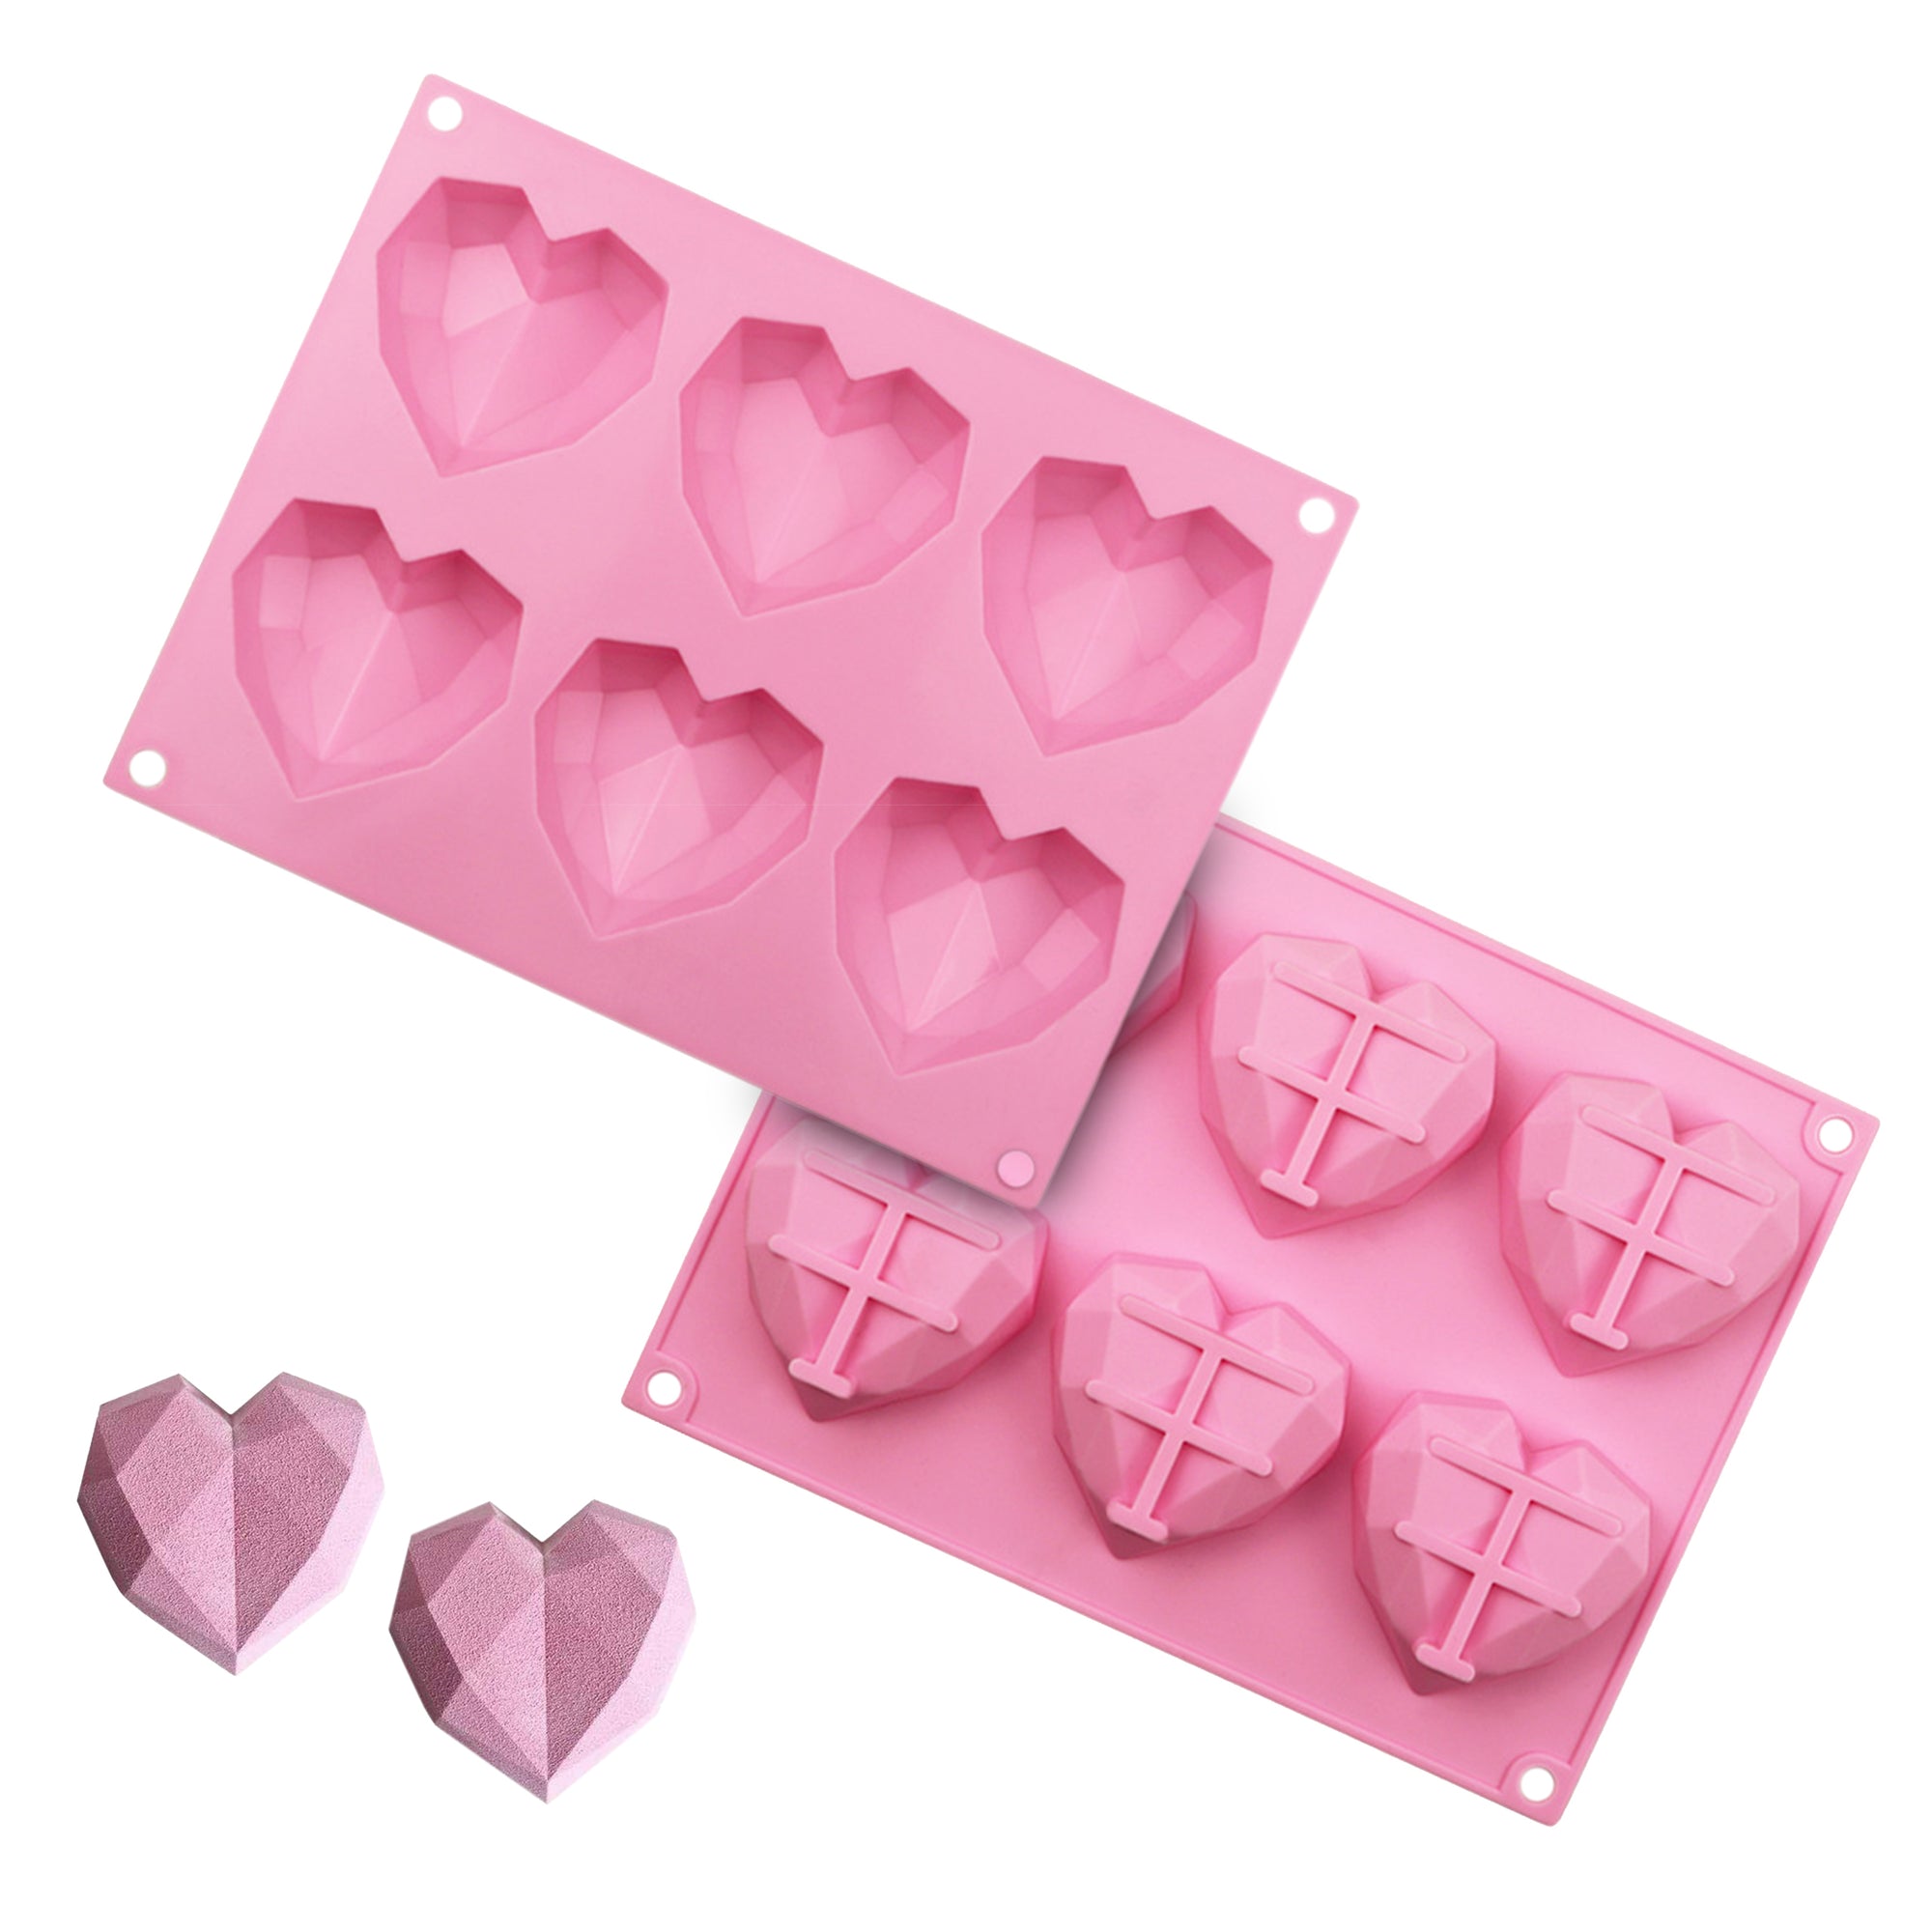 EddHomes Breakable Heart Molds for Chocolate with Hammer, Heart Silicone Mold for Baking 8 Cavity Diamond Heart Shaped Mold, 8.8 Large Breakable Heart Mold